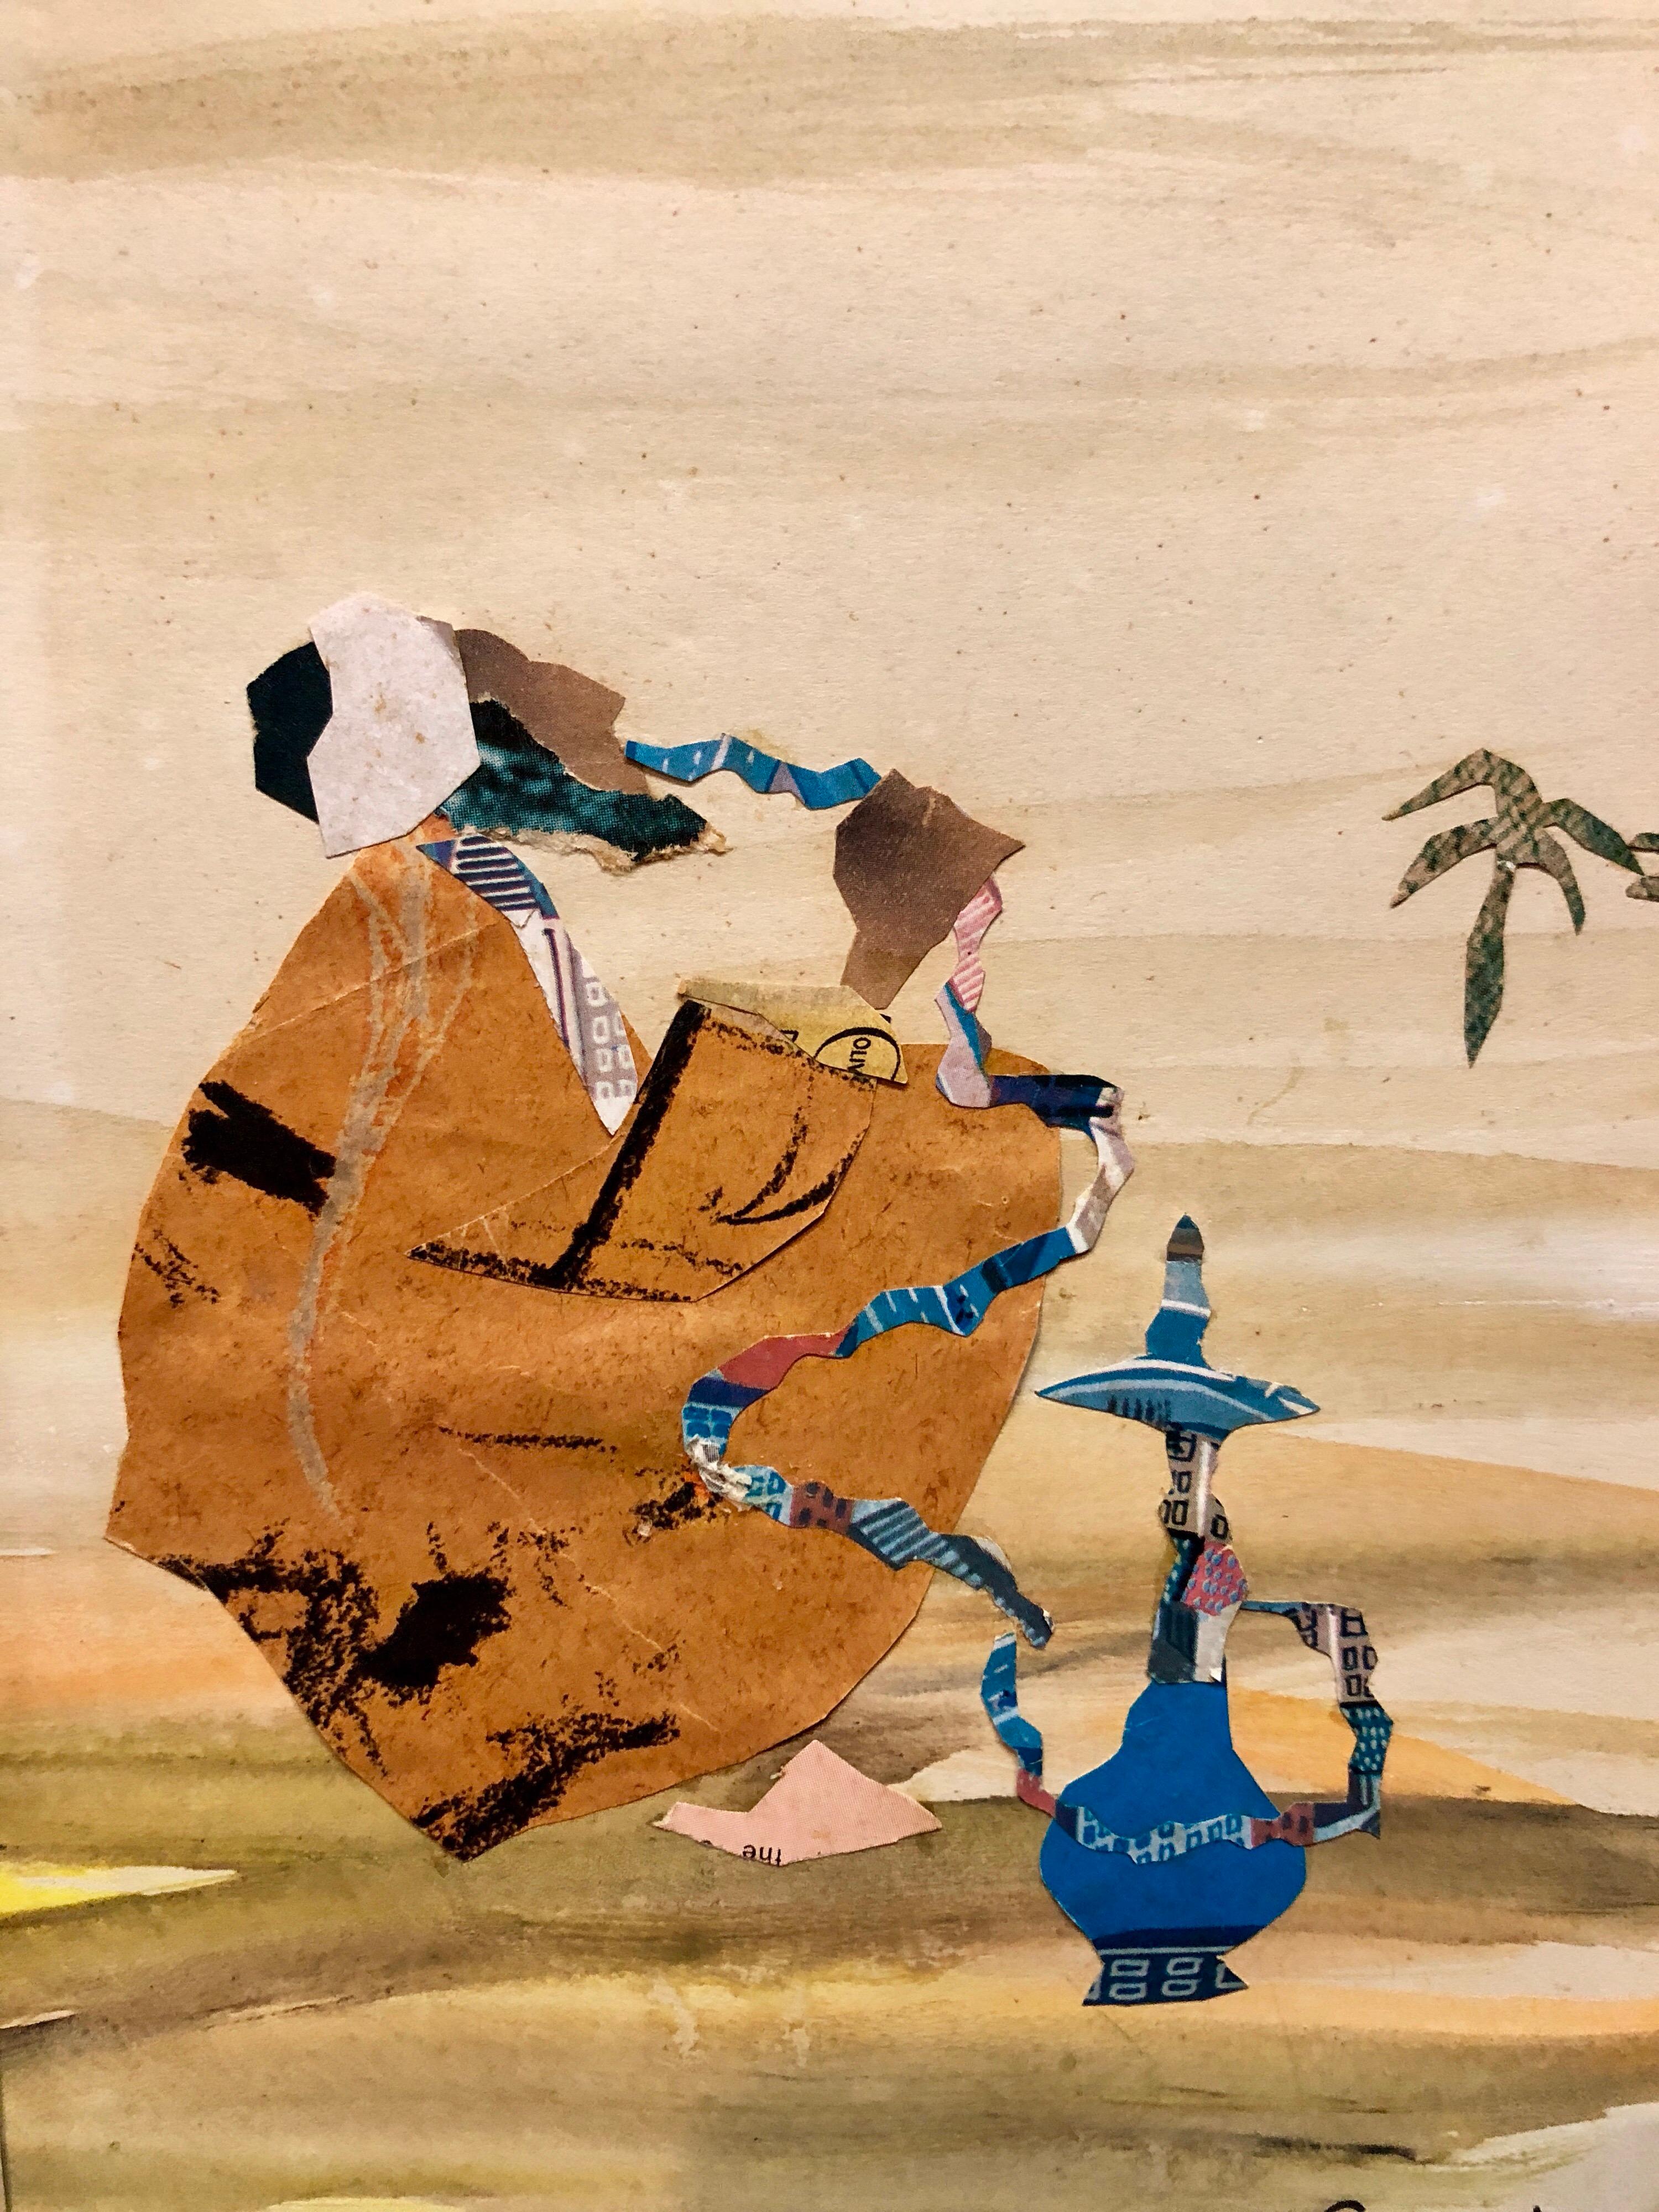 Israeli Abstract Figure, Hookah Pipe Smoker, Torn Paper Collage Painting Bezalel - Mixed Media Art by Judith Yellin Ginat